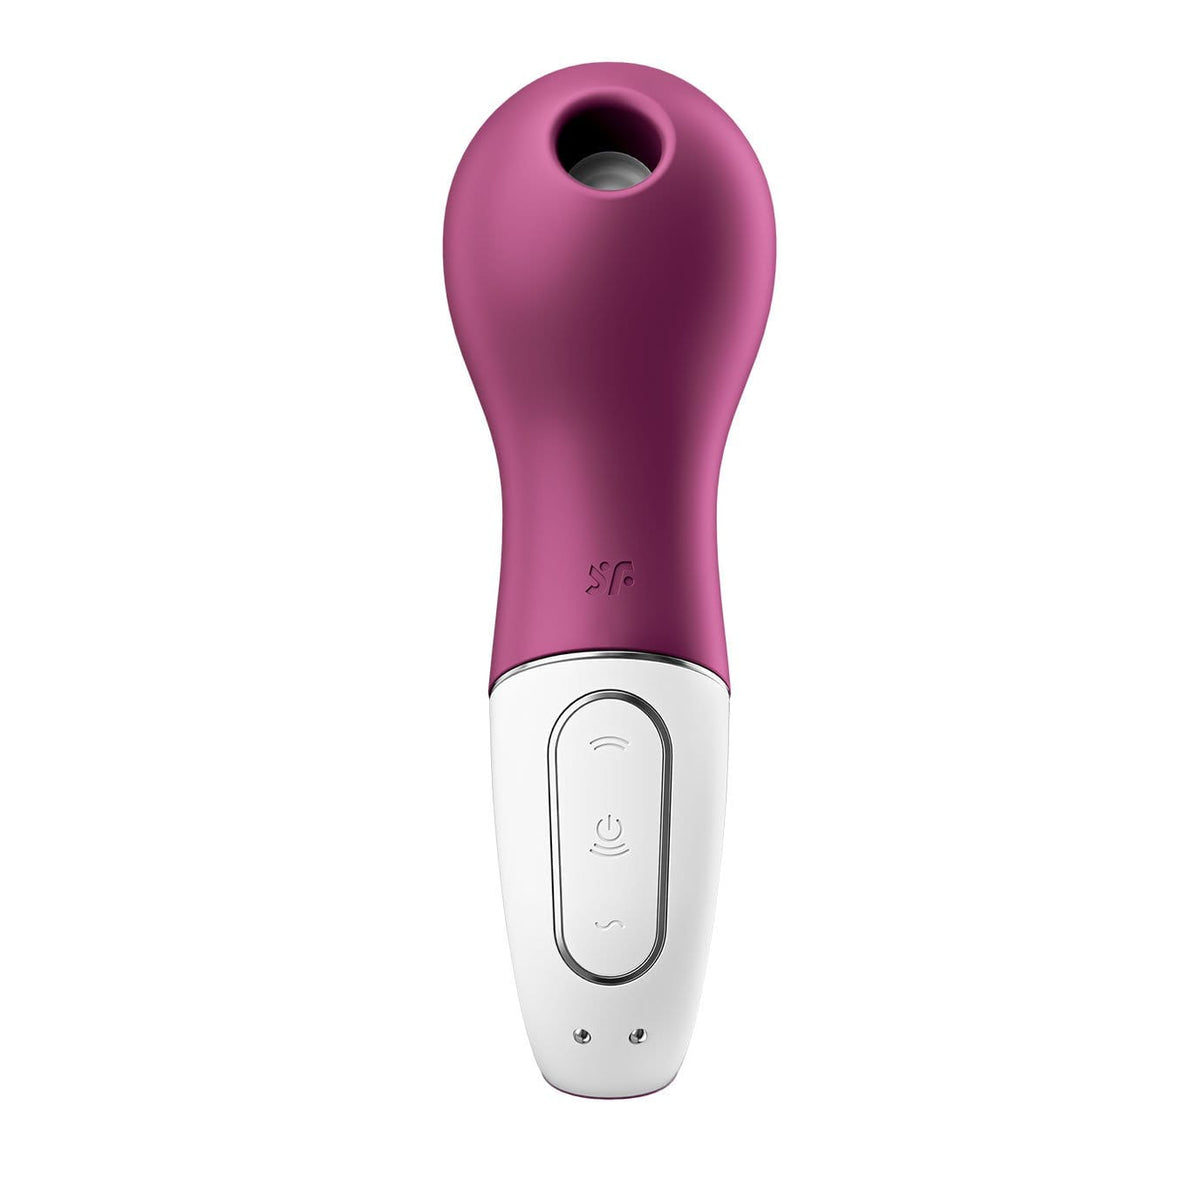 Satisfyer - Lucky Libra Air Pulse Clitoral Air Stimulator (Berry) Clit Massager (Vibration) Rechargeable 520219315 CherryAffairs